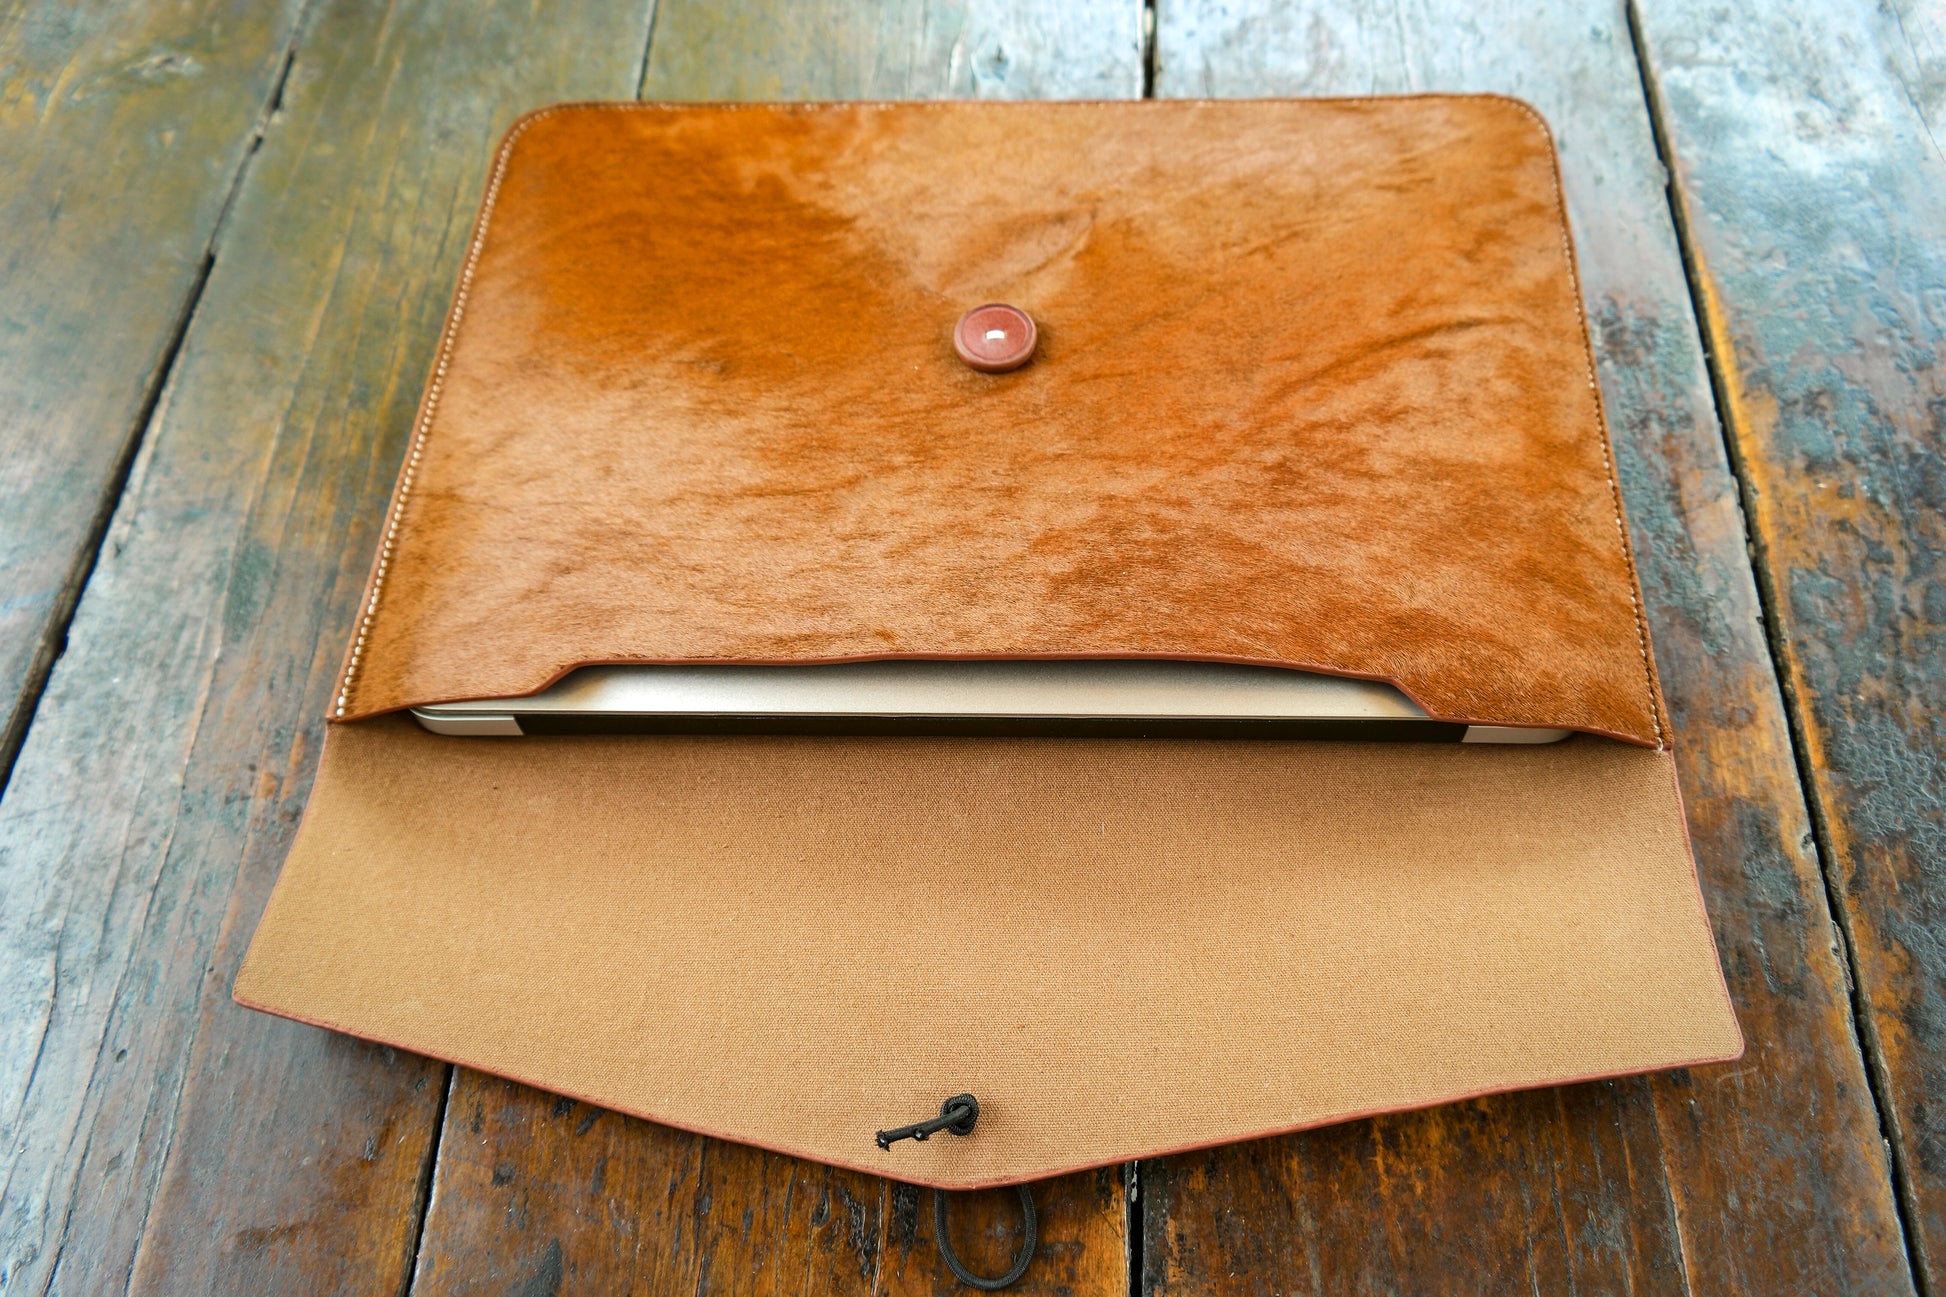 Laptop leather case made of horsehide-Leather Laptop Carrying Cases & Sleeves Leather laptop bag leather laptop cover Laptop Case 13/14 / 15/16/17/17.5 inch case/sleeve, leather laptop cover